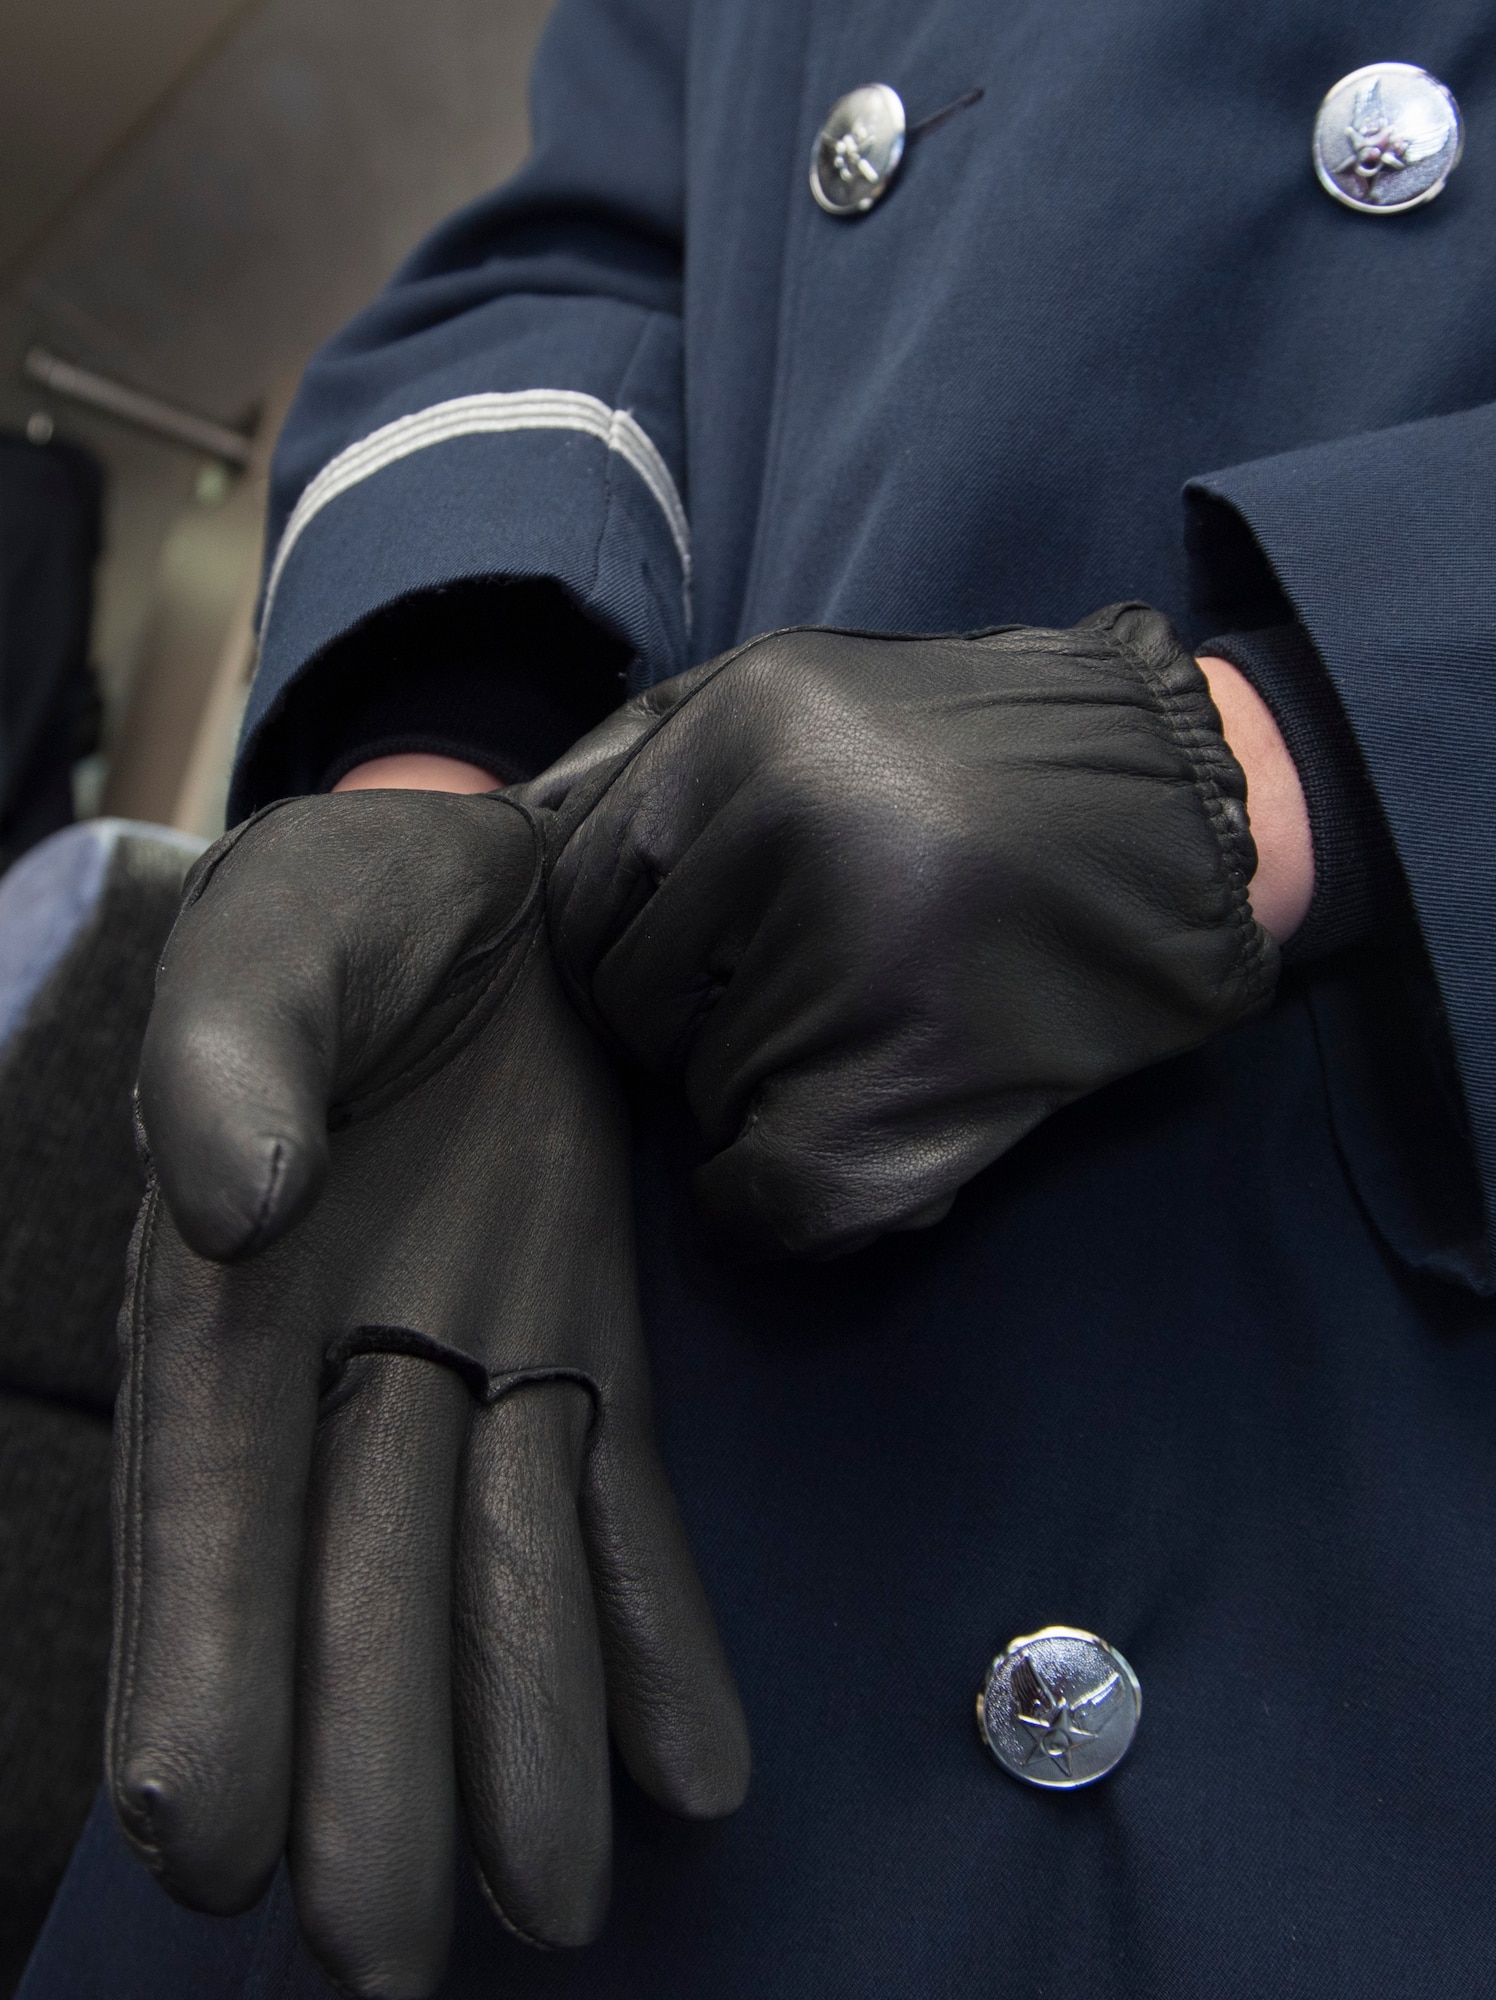 Airman 1st Class Daniela Bejarano, U.S. Air Force Honor Guard ceremonial guardsman, puts on gloves in preparation for the annual Chicago St. Patrick’s Day Parade, March 11, 2017. In addition to wearing gloves, the honor guard members wore overcoats, earmuffs, a scarf and black sling to combat winter temperatures of less than 30 degrees during the event. (U.S. Air Force photo by Senior Airman Jordyn Fetter)